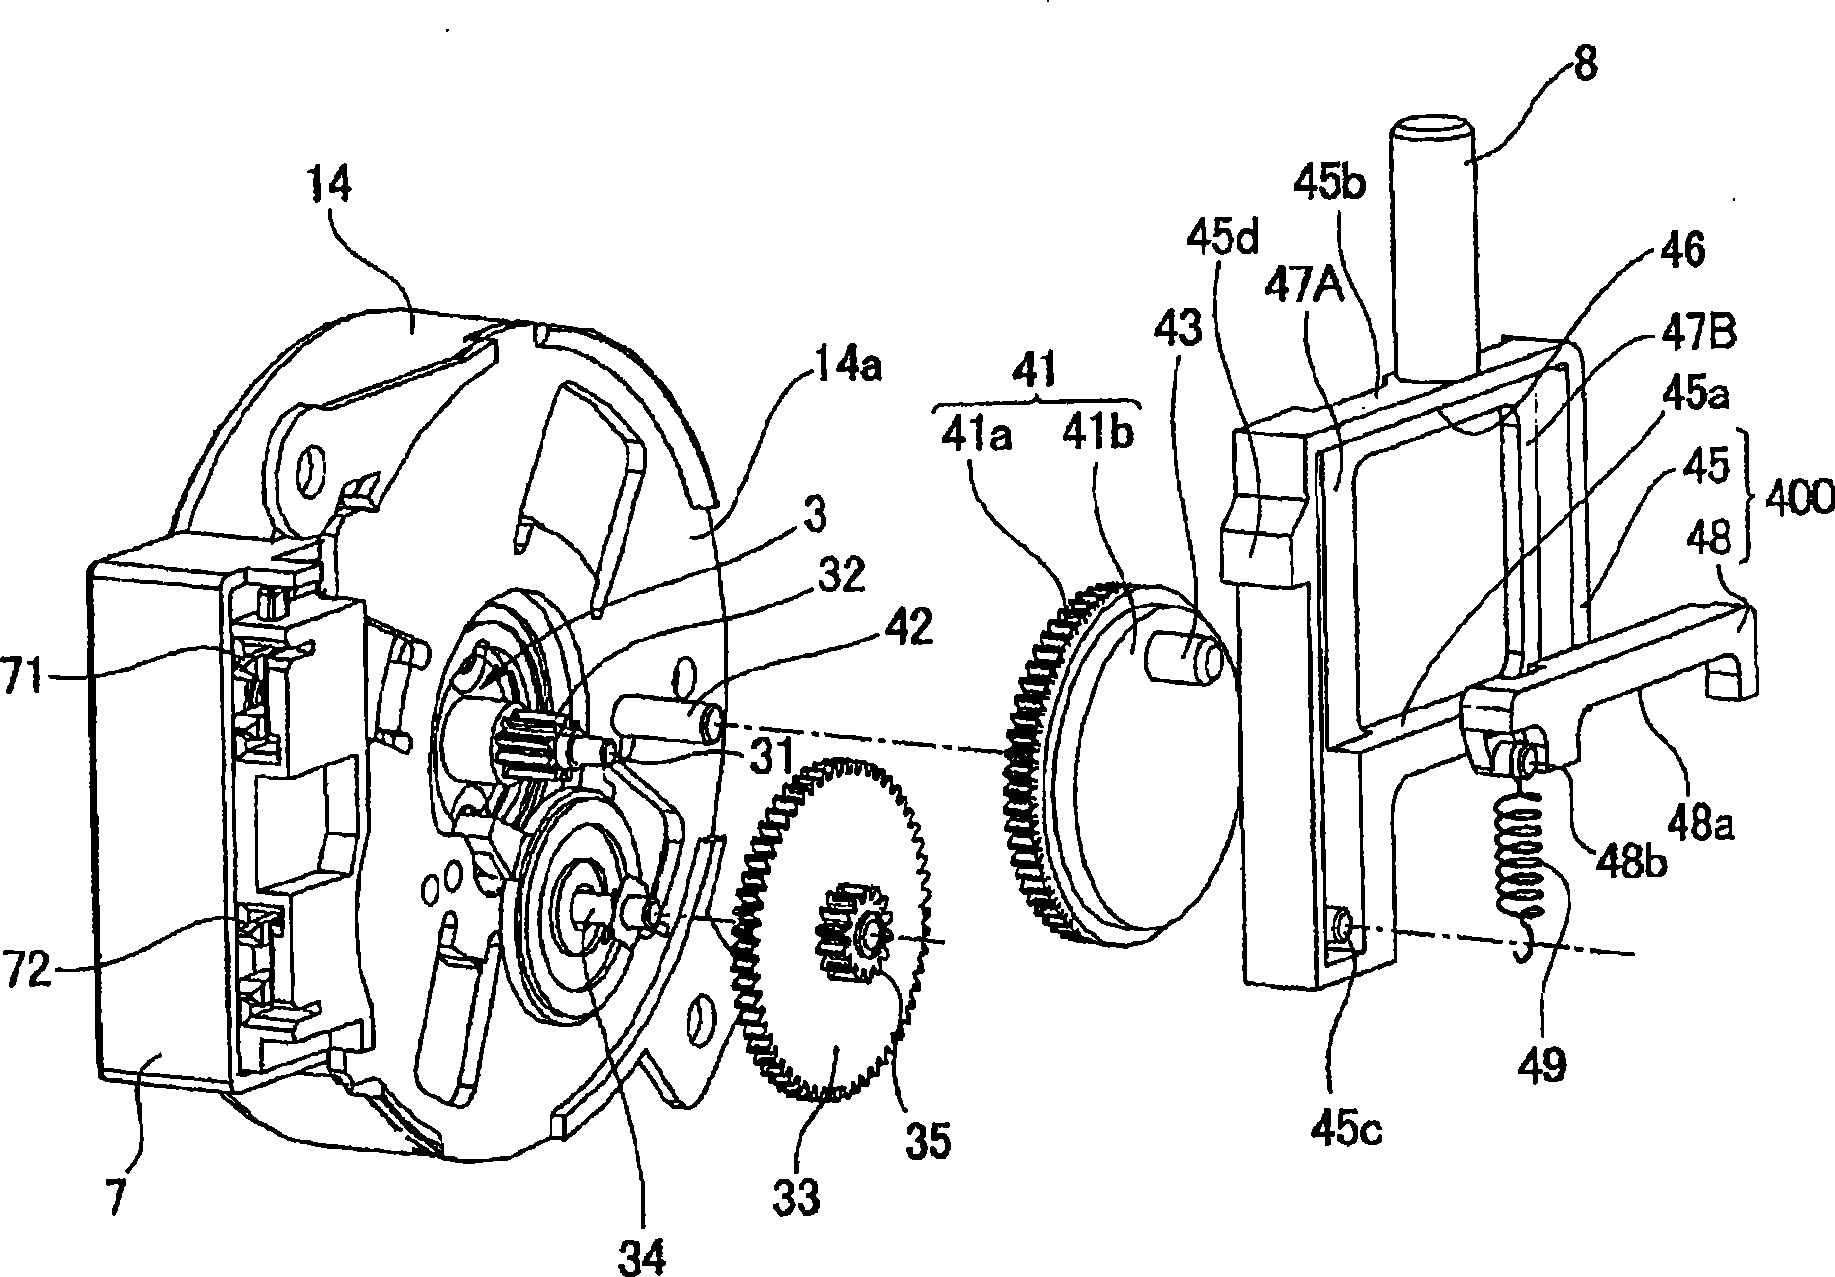 Cover locking device